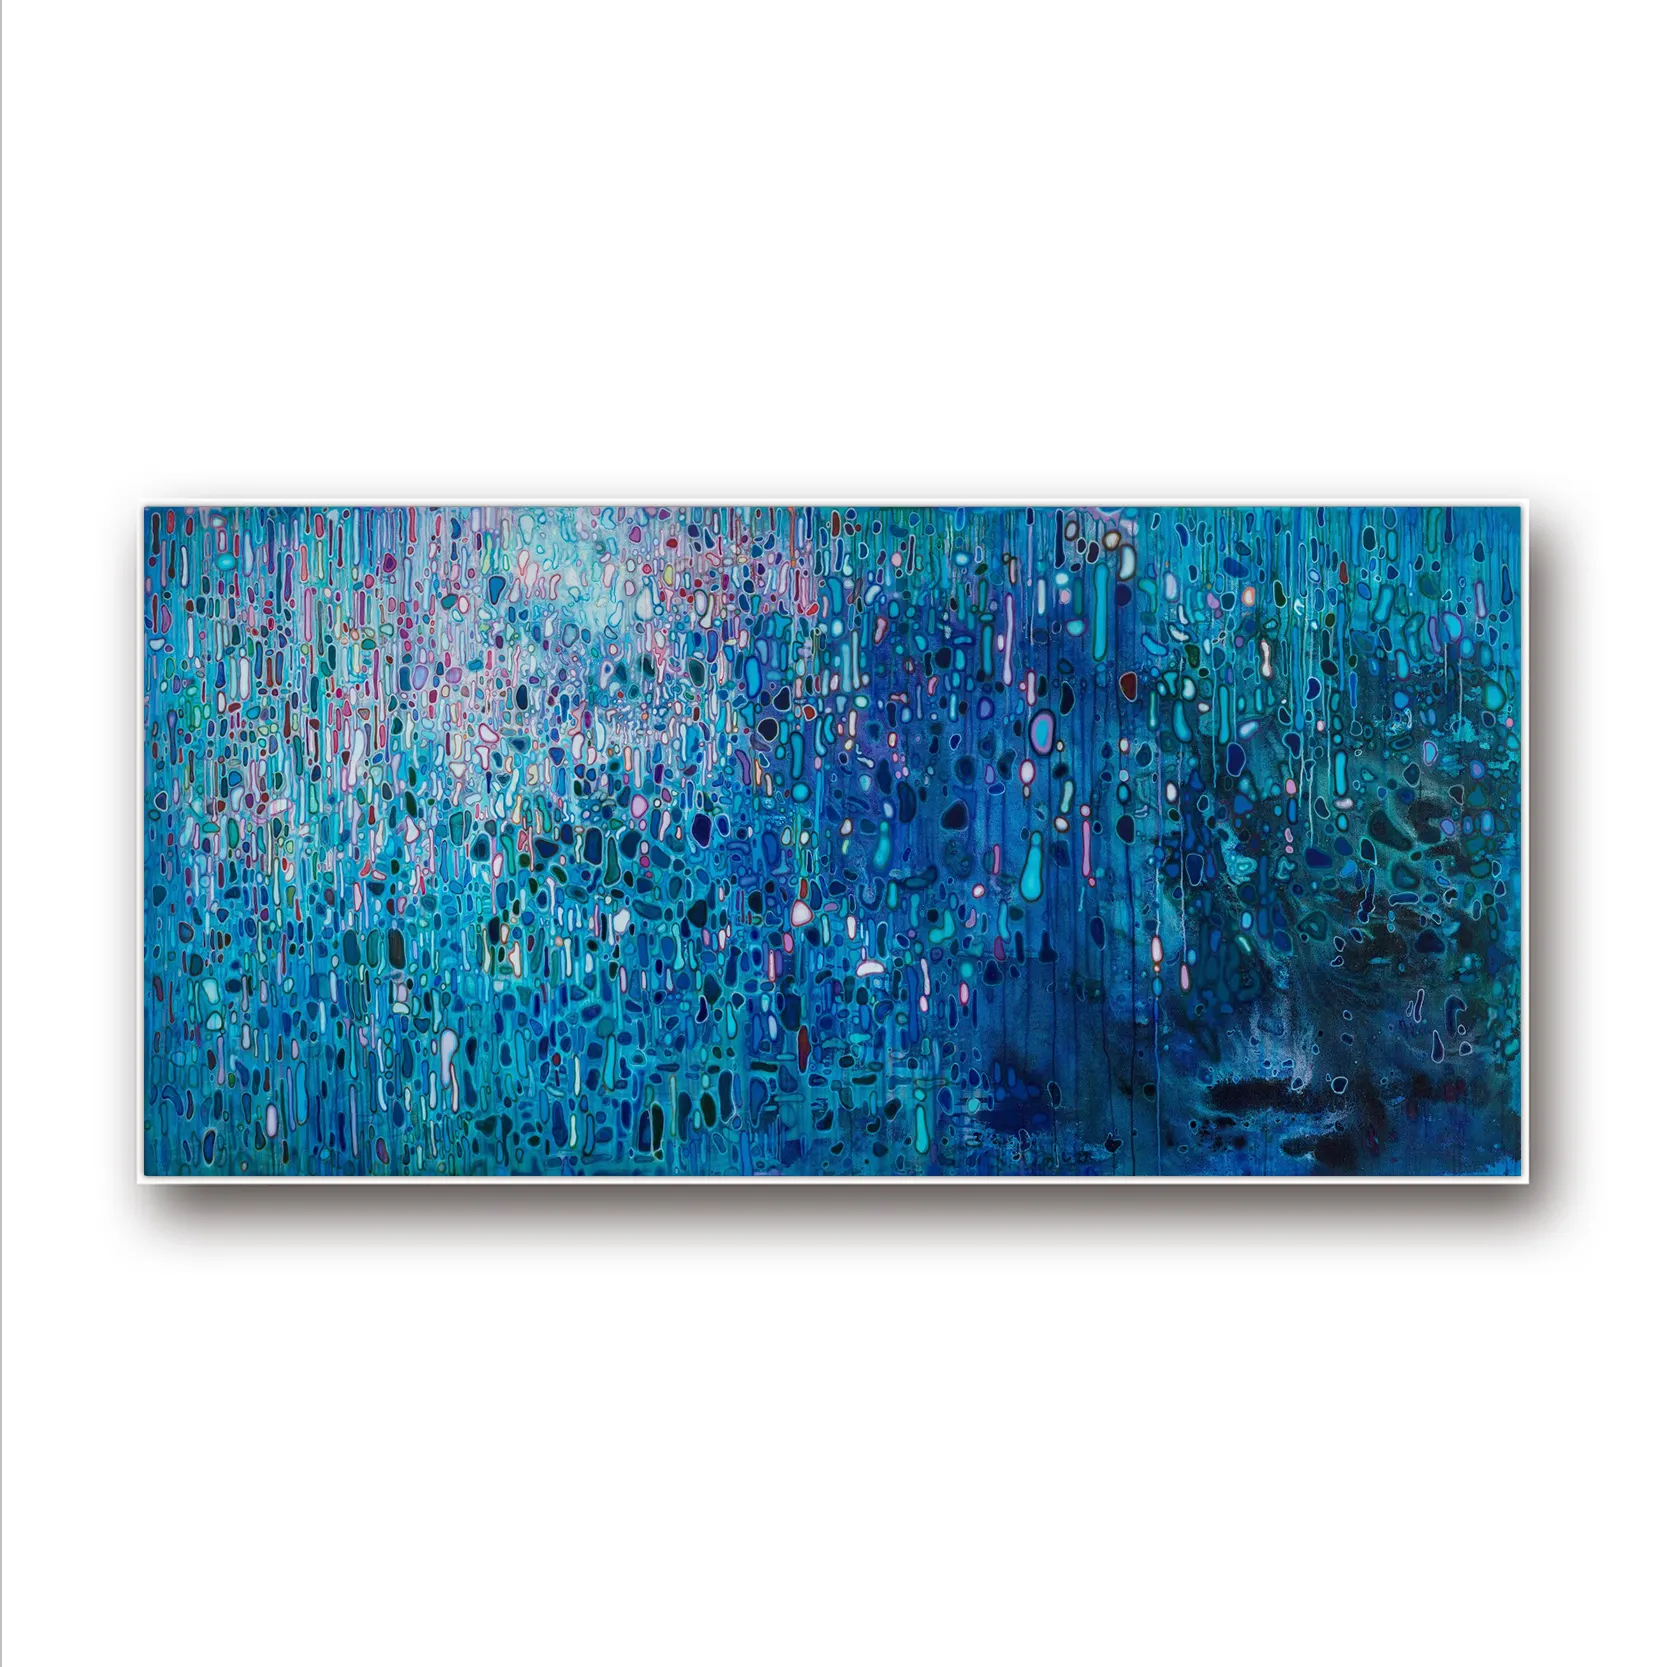 home decor Wall art large-size abstract seascape paintings Oil Painting on Canvas high end decorative painting